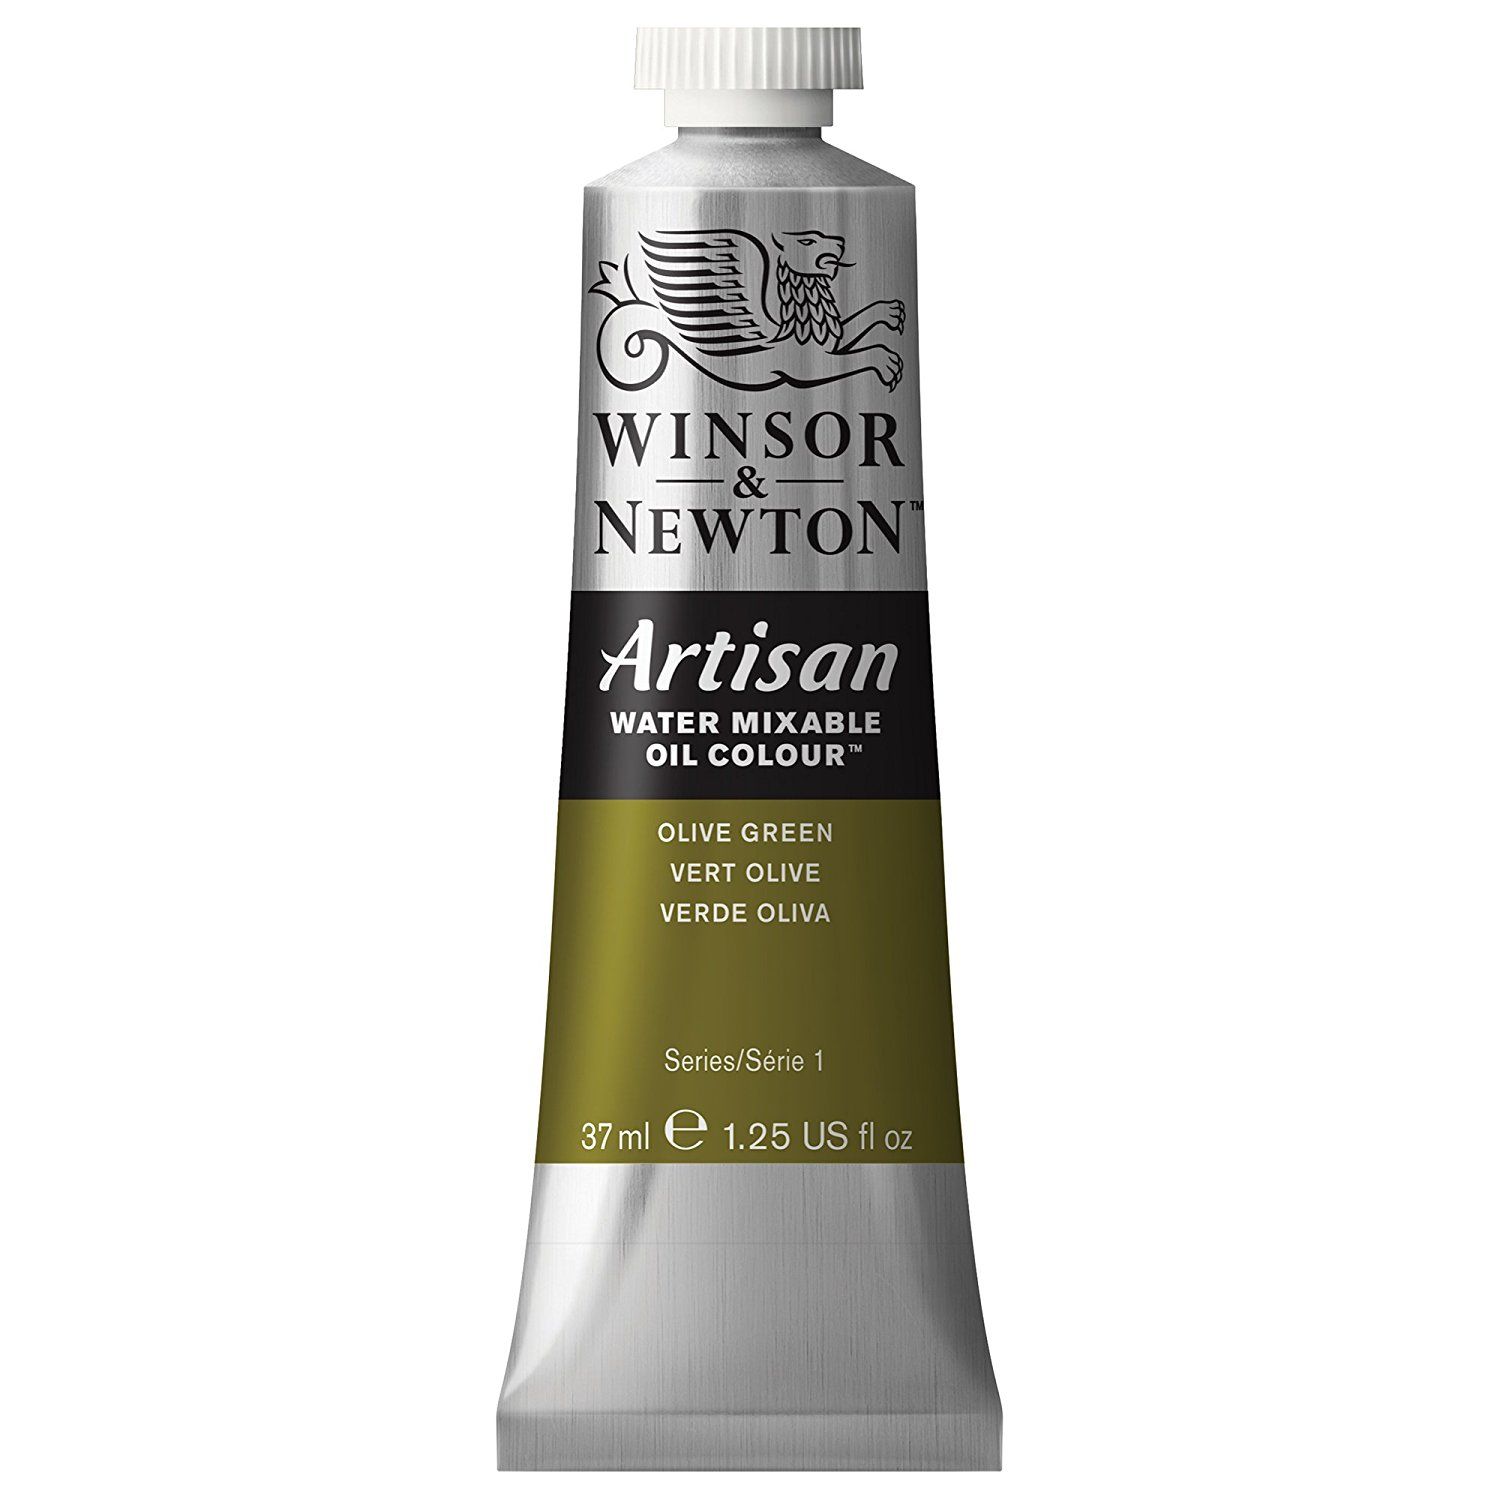 Artisan Water Mixable Oil - Olive Green 37ml